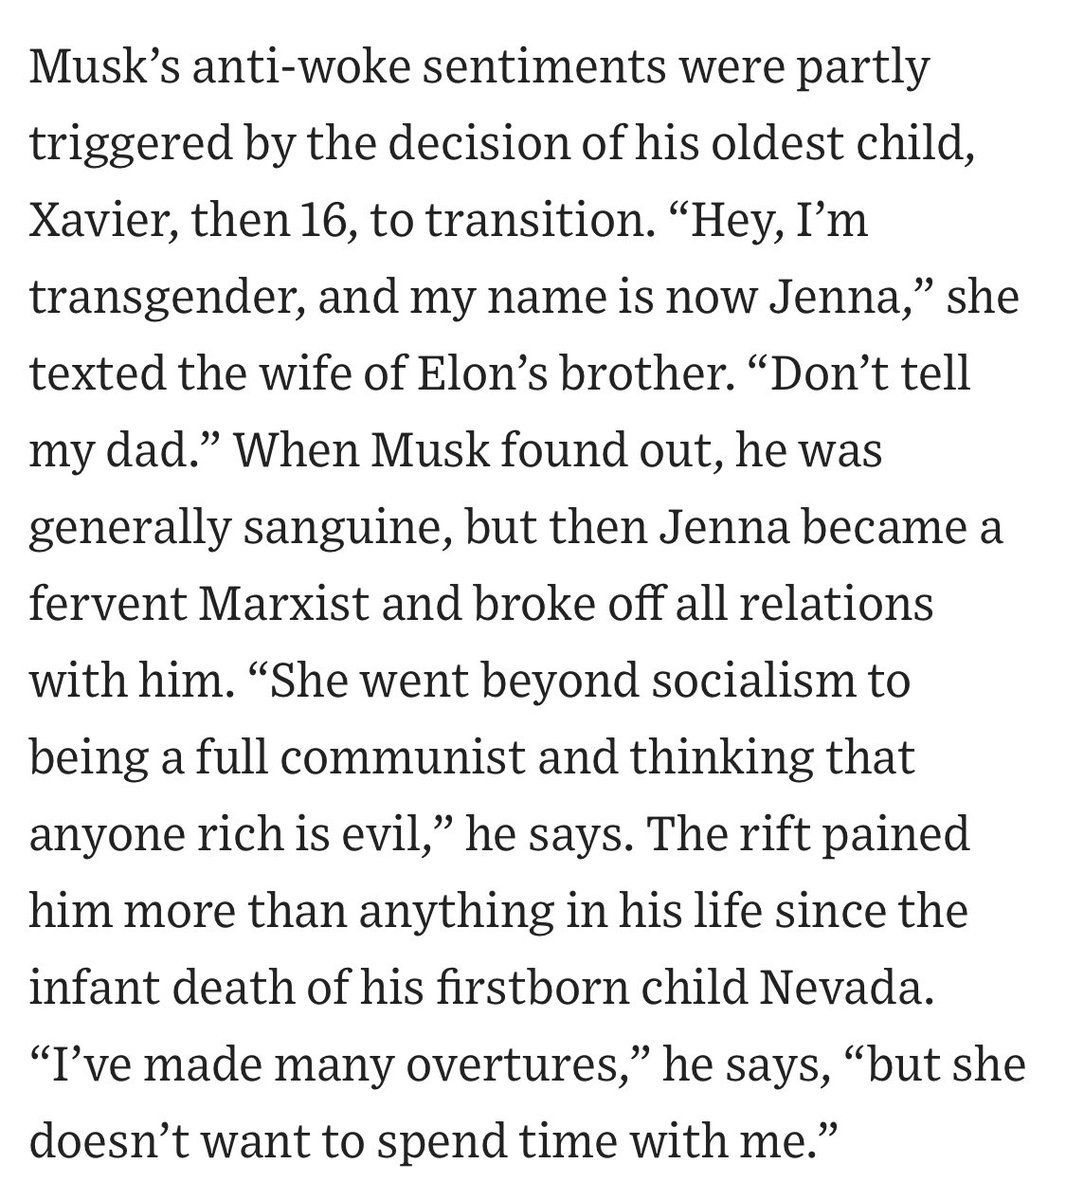 Elon’s daughter sounds cool as hell. And he sounds like a horrible father.